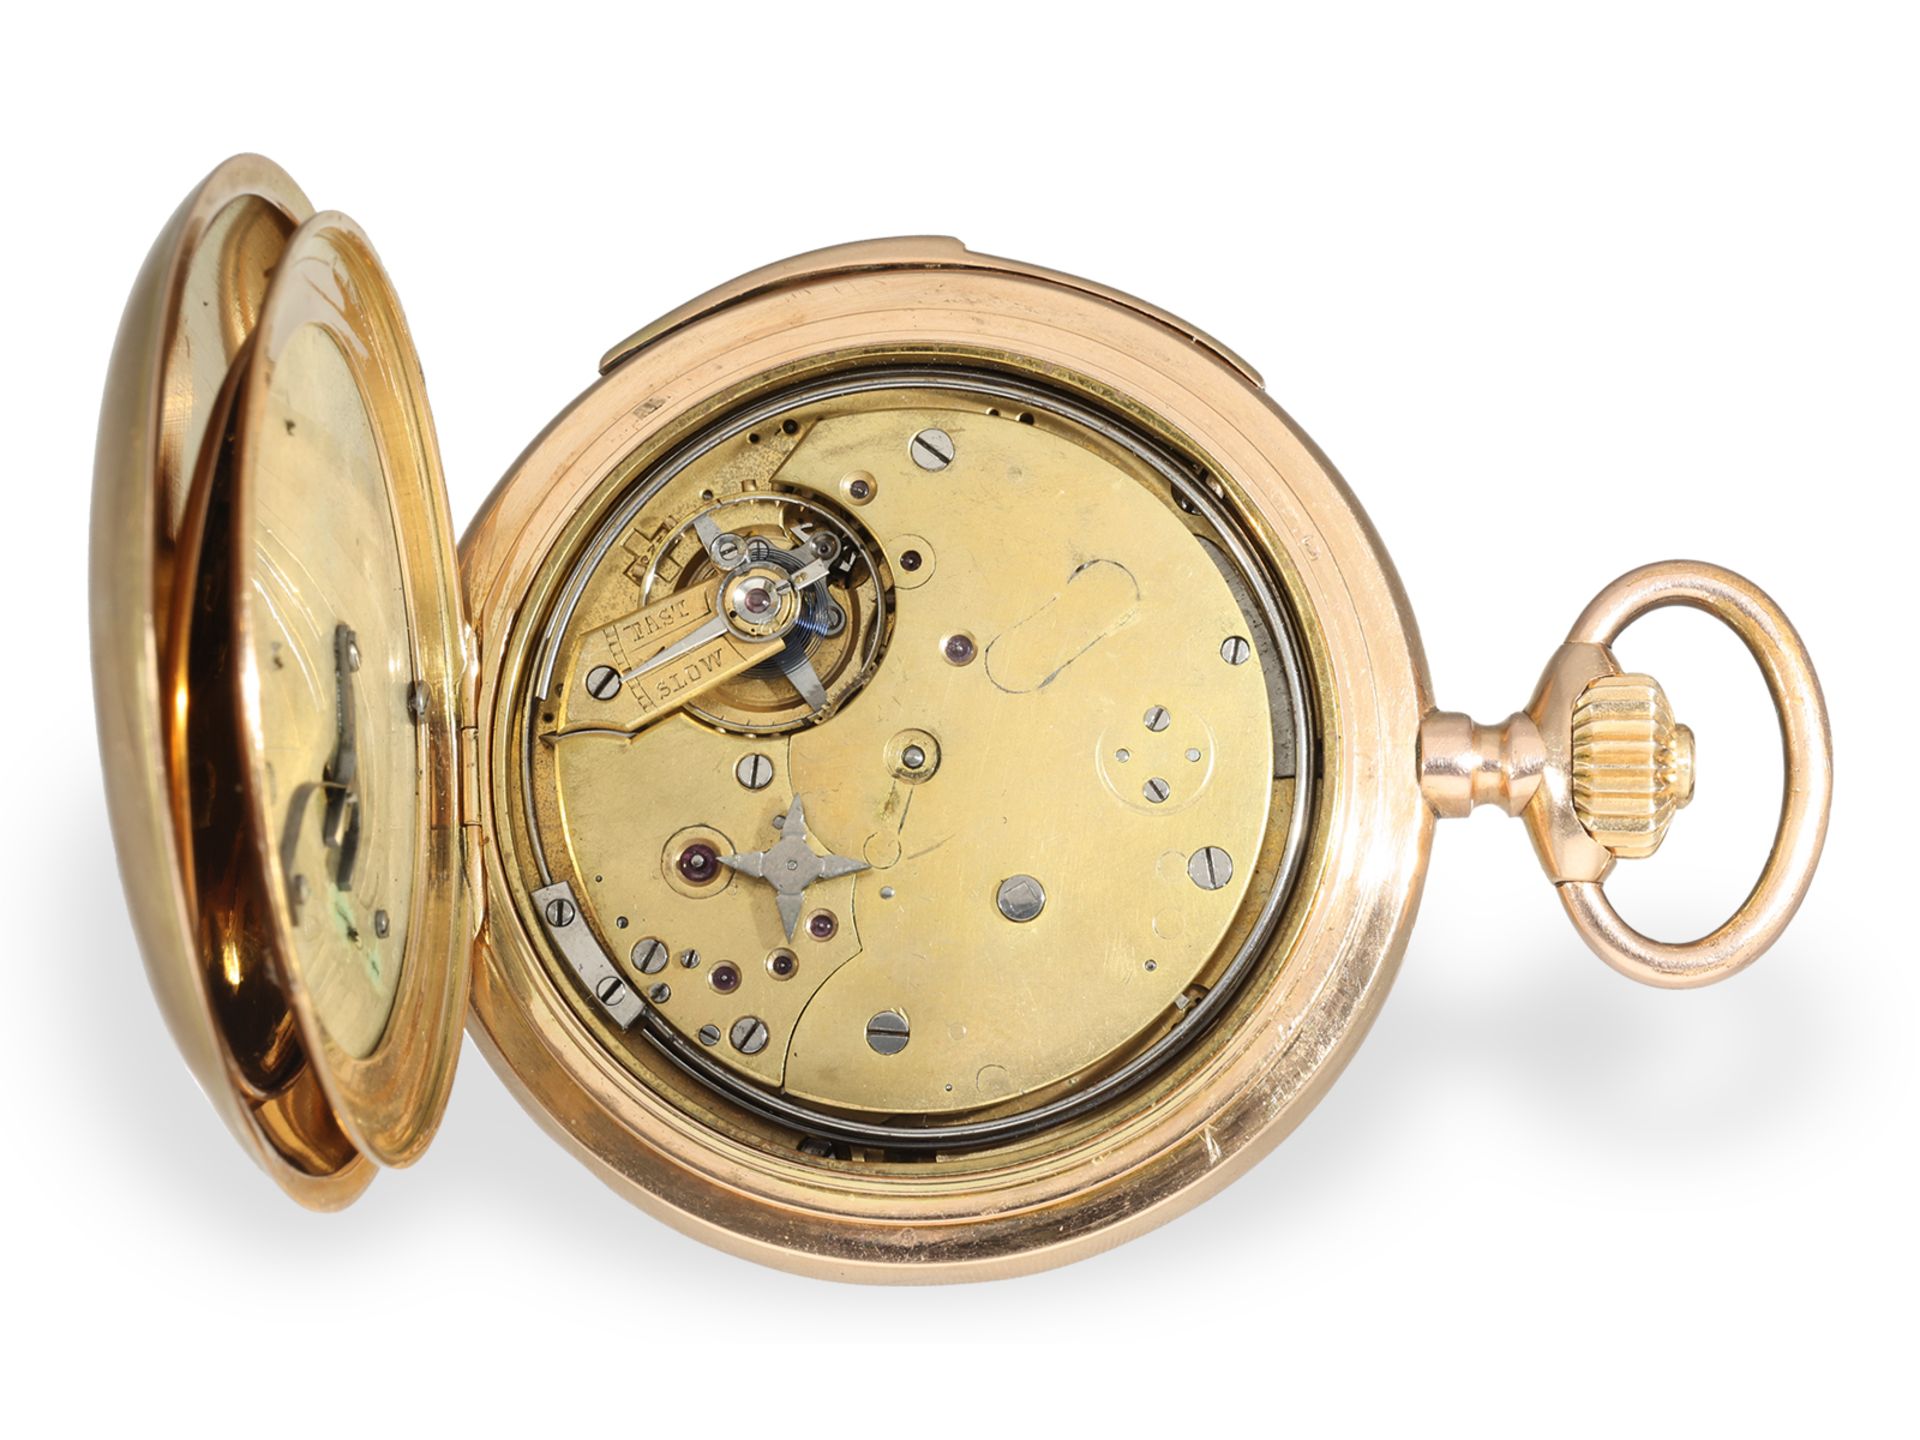 Pocket watch: heavy gold hunting case watch with minute repeater and erotic automaton, ca. 1900 - Image 3 of 6